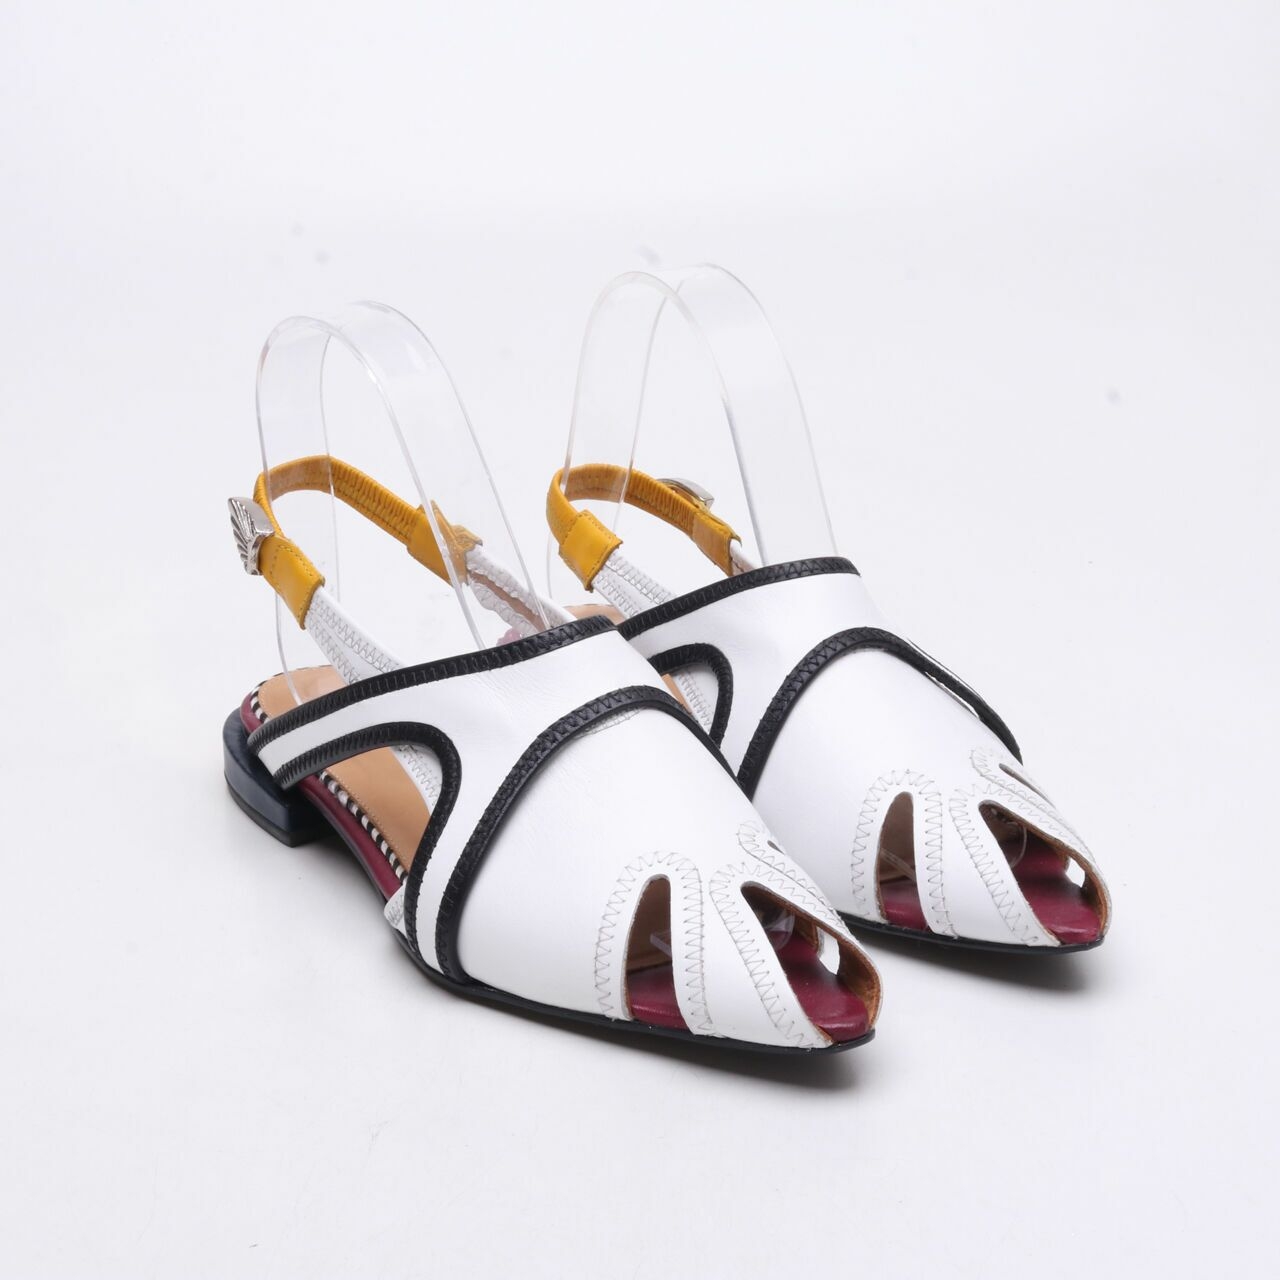 Toga Pulla White Pointy Leather Flats